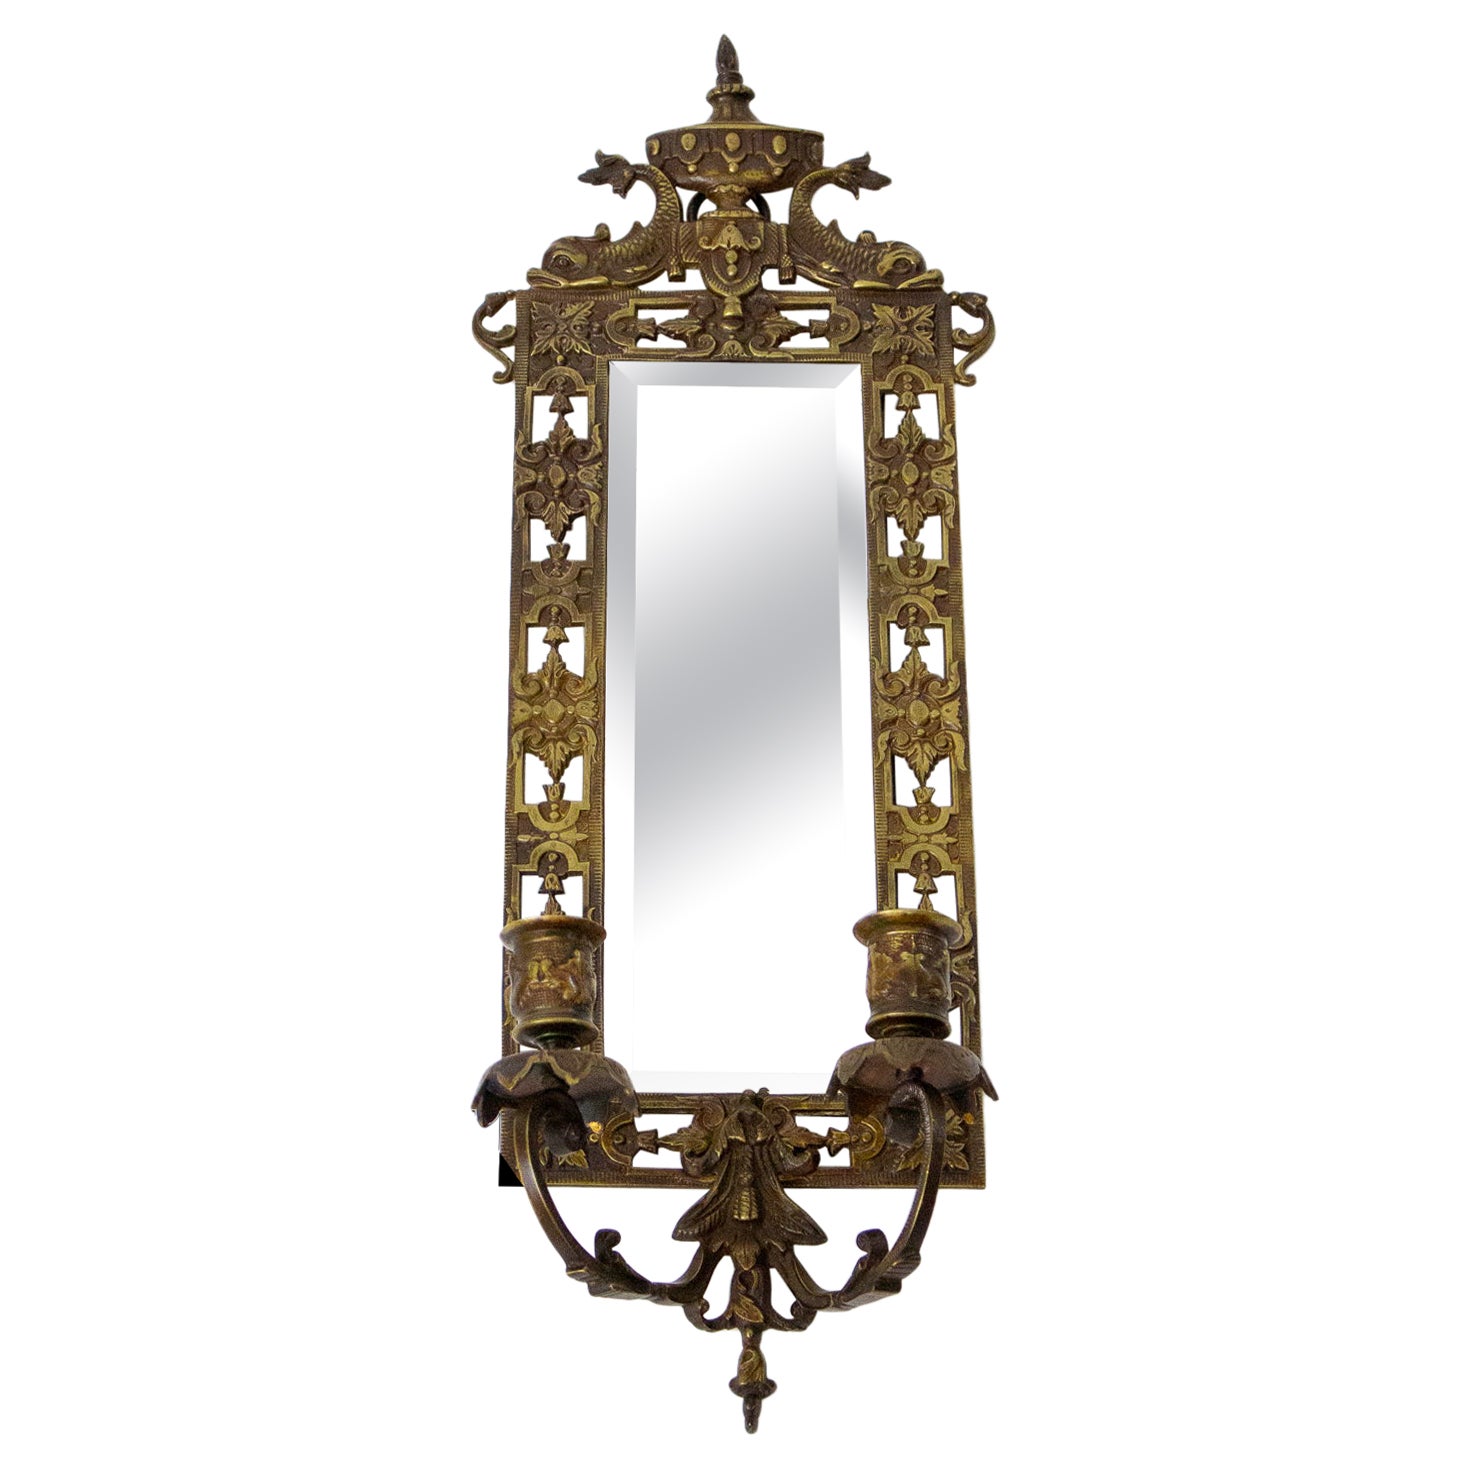 Late 19th Century Cast Brass Victorian Mirrored Candle Sconce For Sale